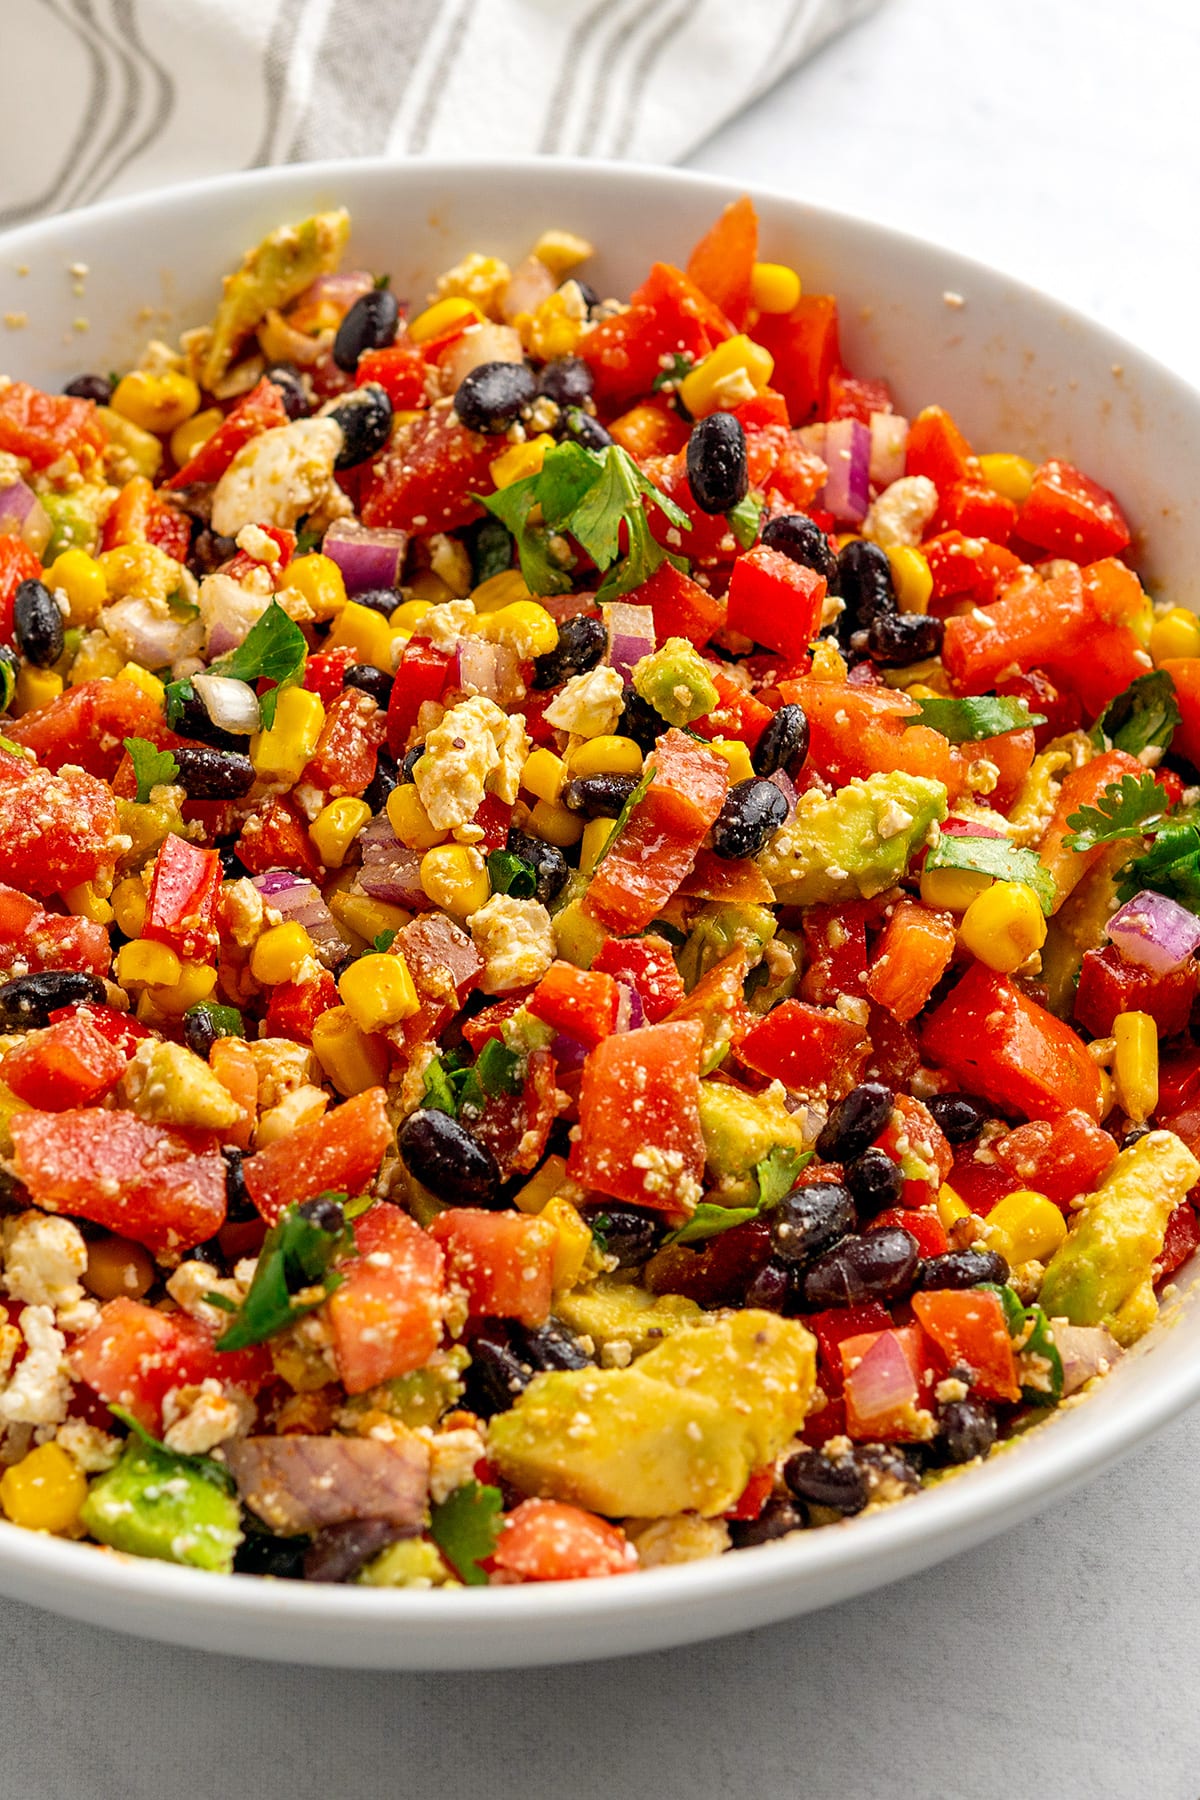 Fiesta salad with black beans, corn, avocado, peppers